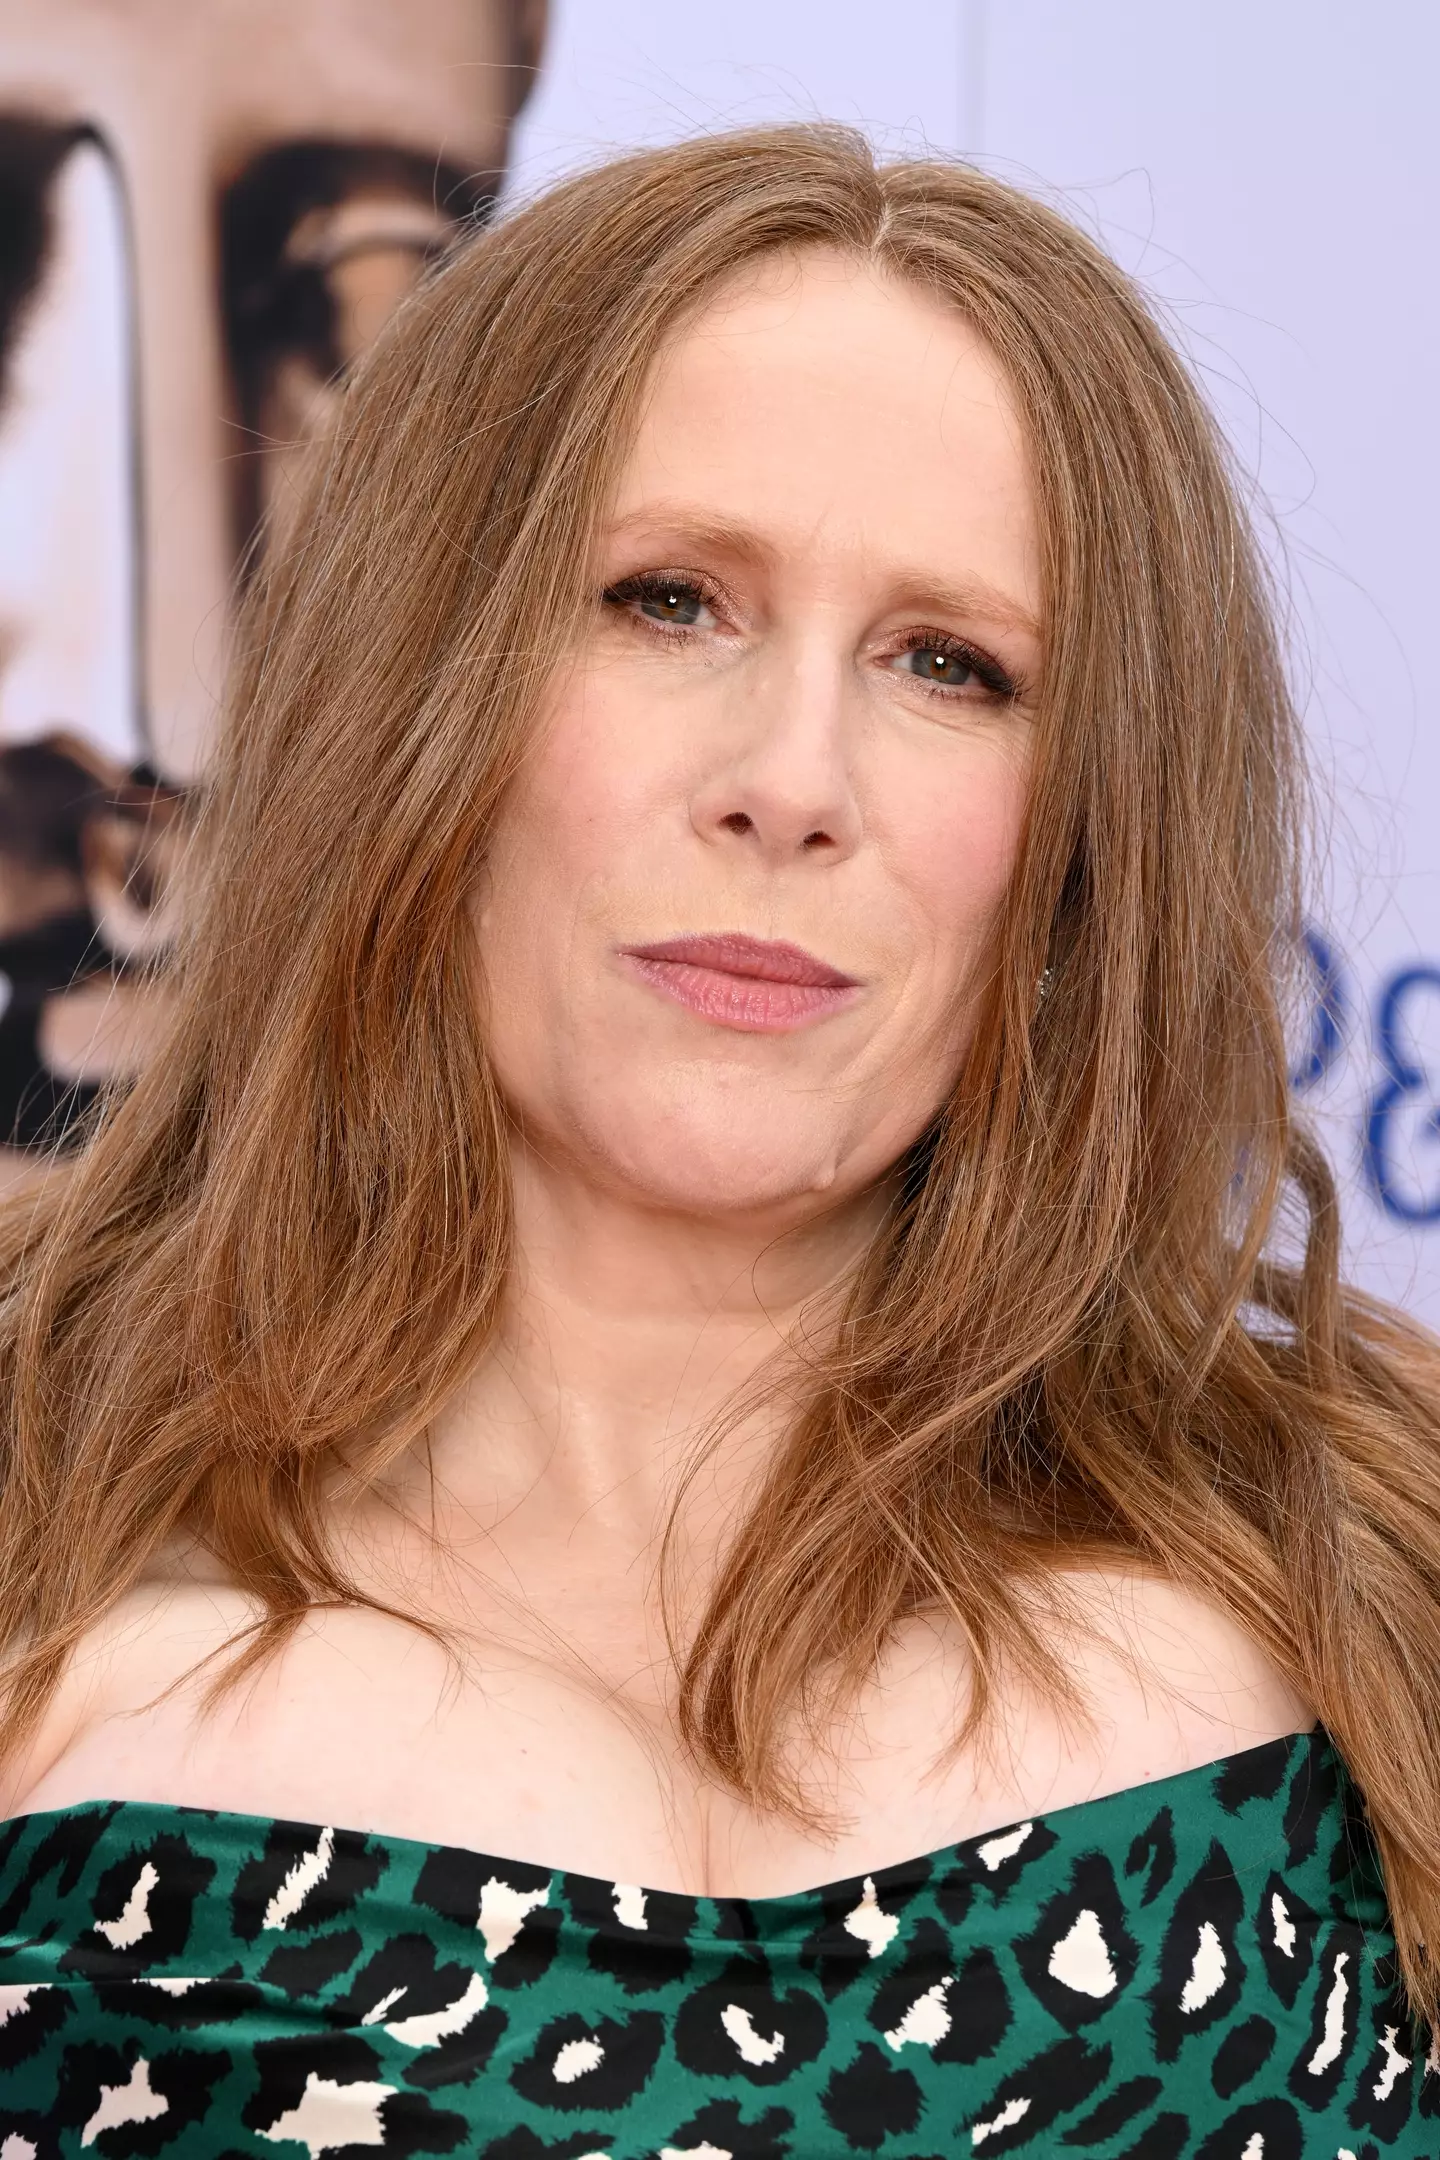 Catherine Tate was shocked to discover her show had been cancelled by Netflix.